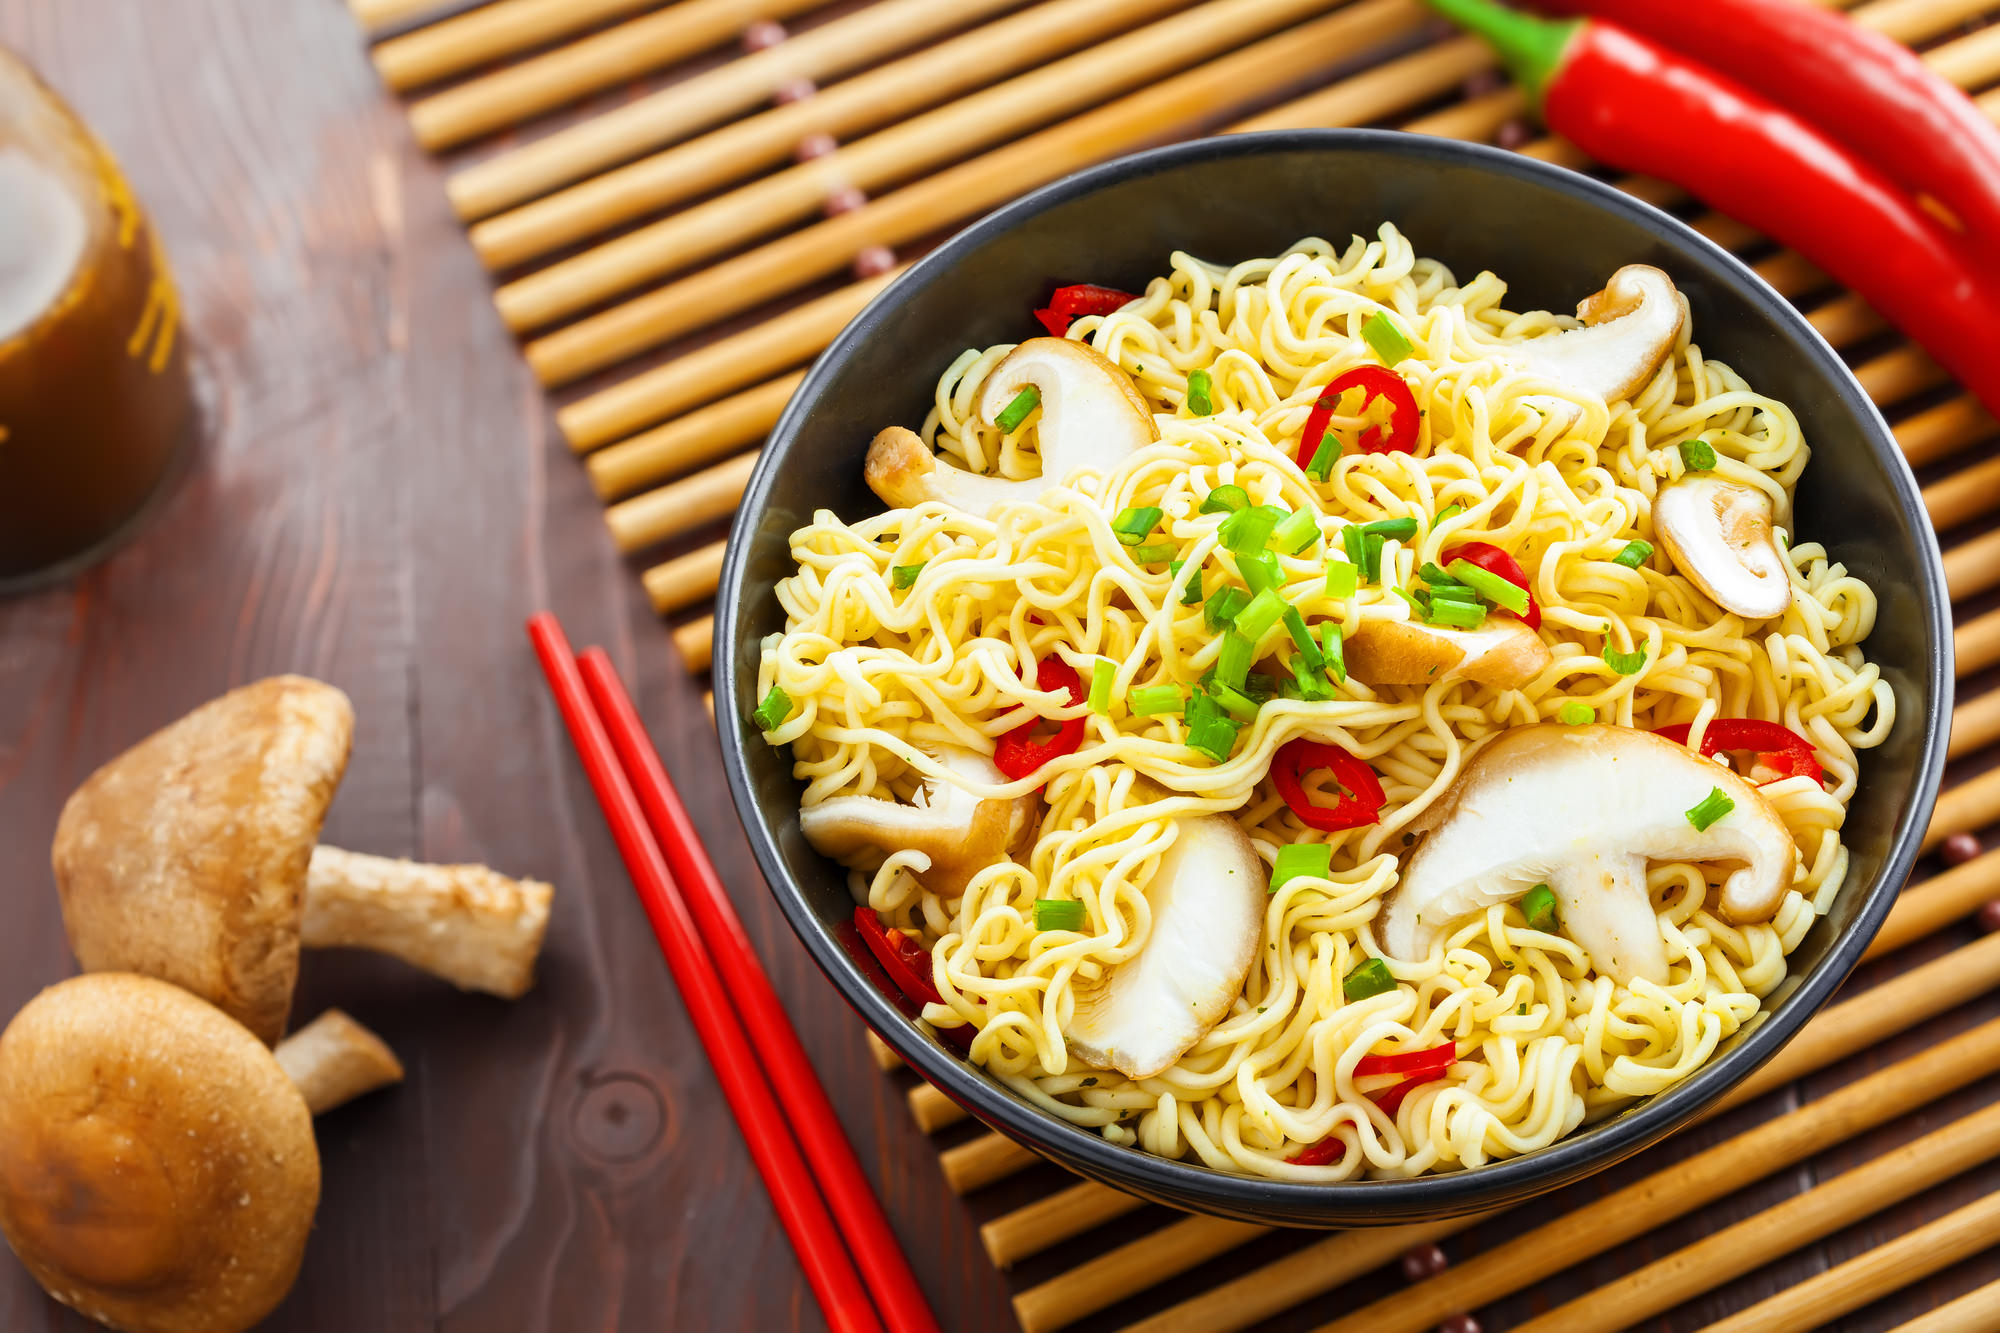 This Recipe Is The Reason I Love Noodles! | Recipes & Drinks - BabaMail